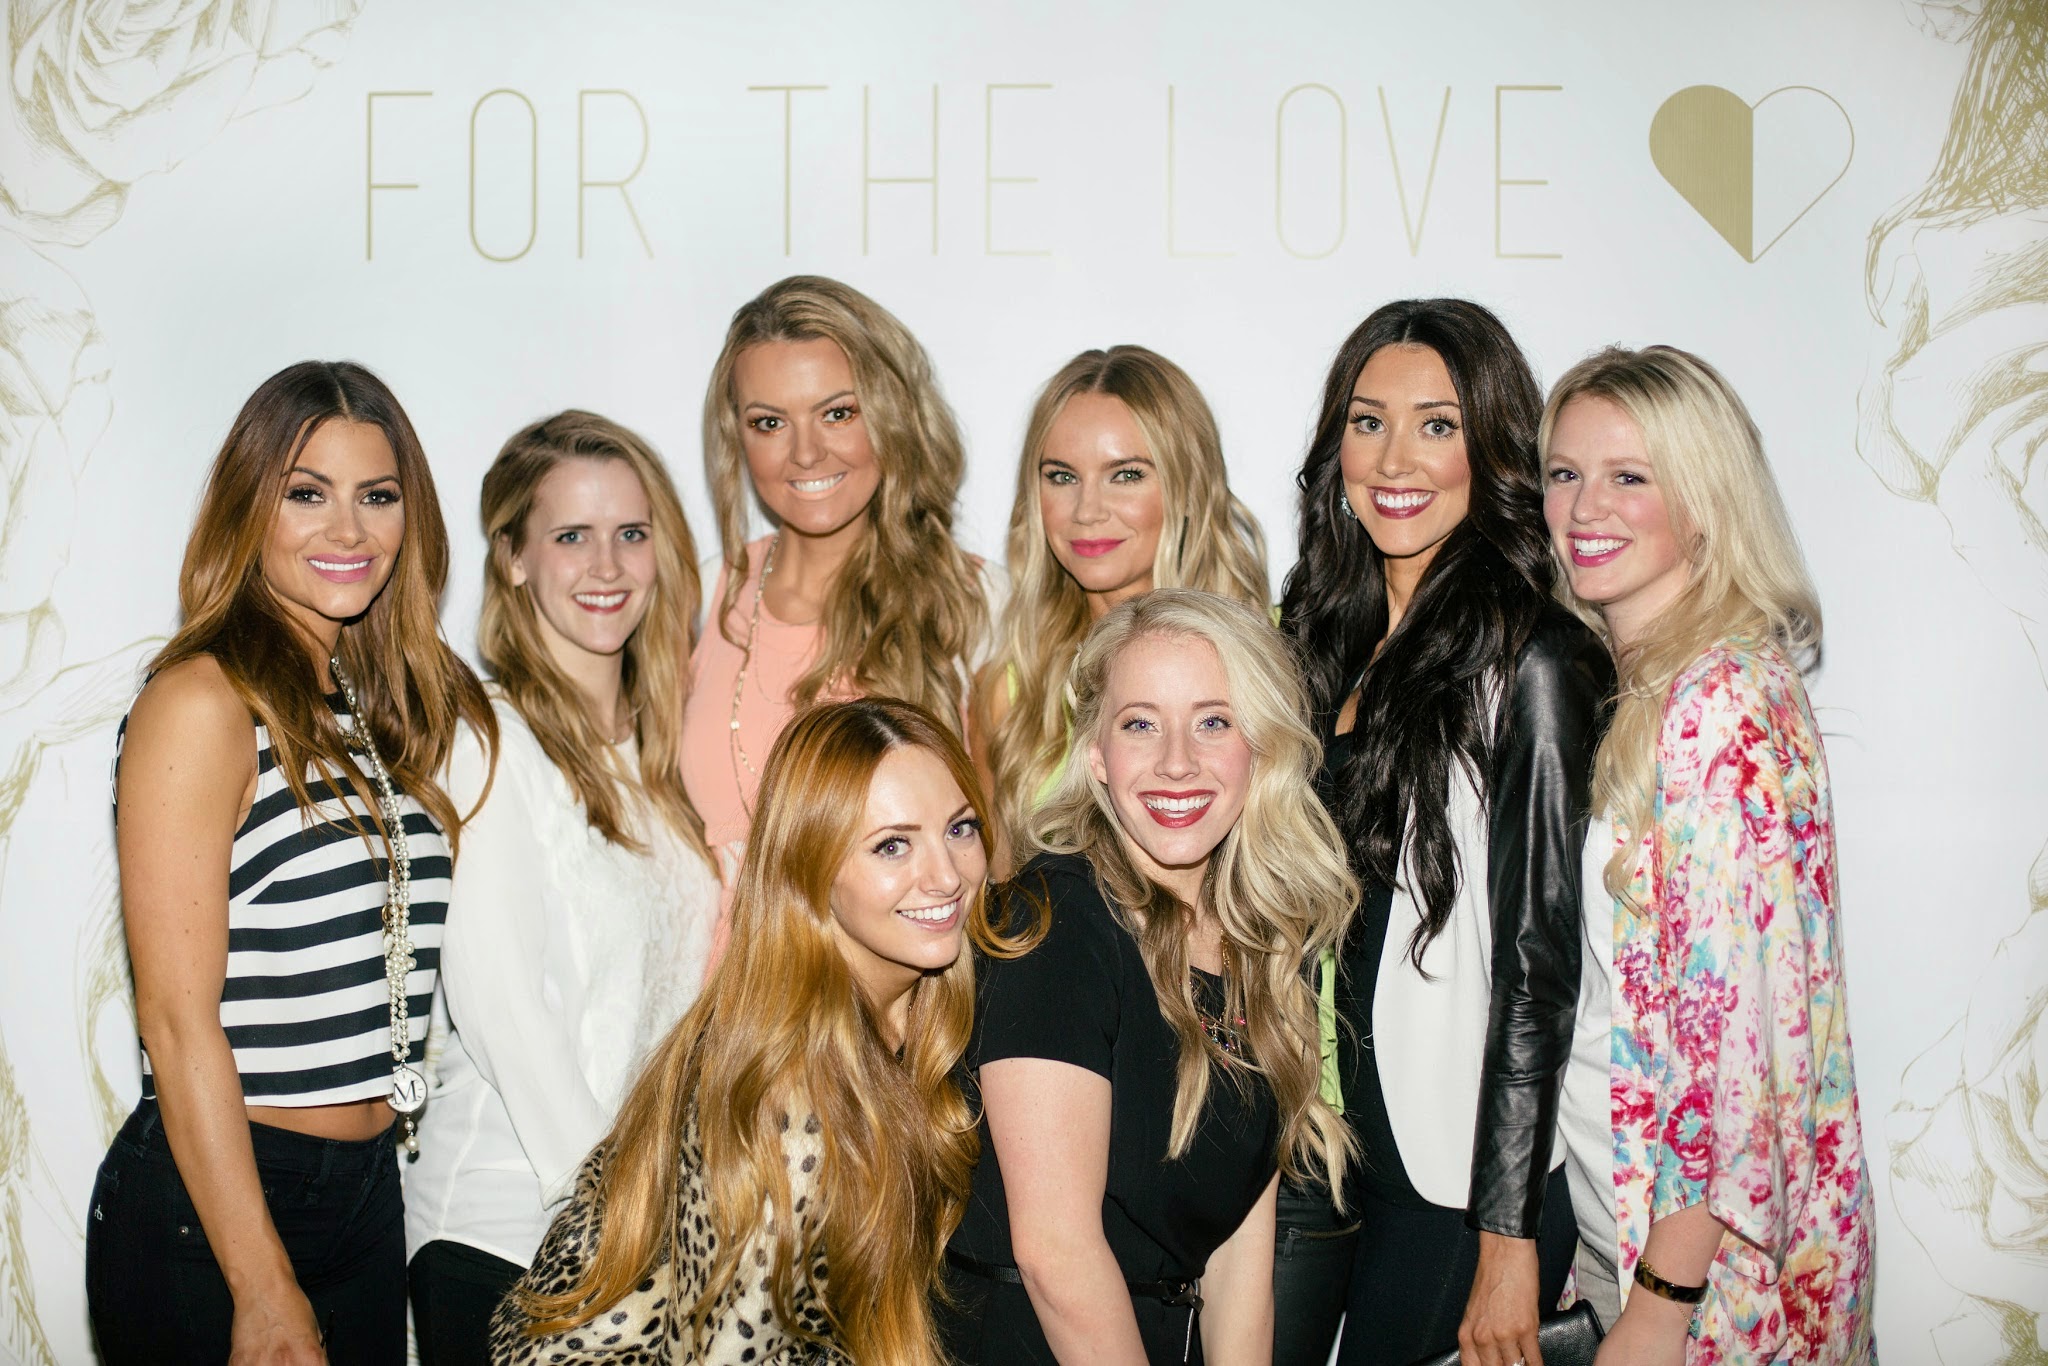 No Reason Needed: FOR THE LOVE ... A BEAUTY AND FASHION EVENT